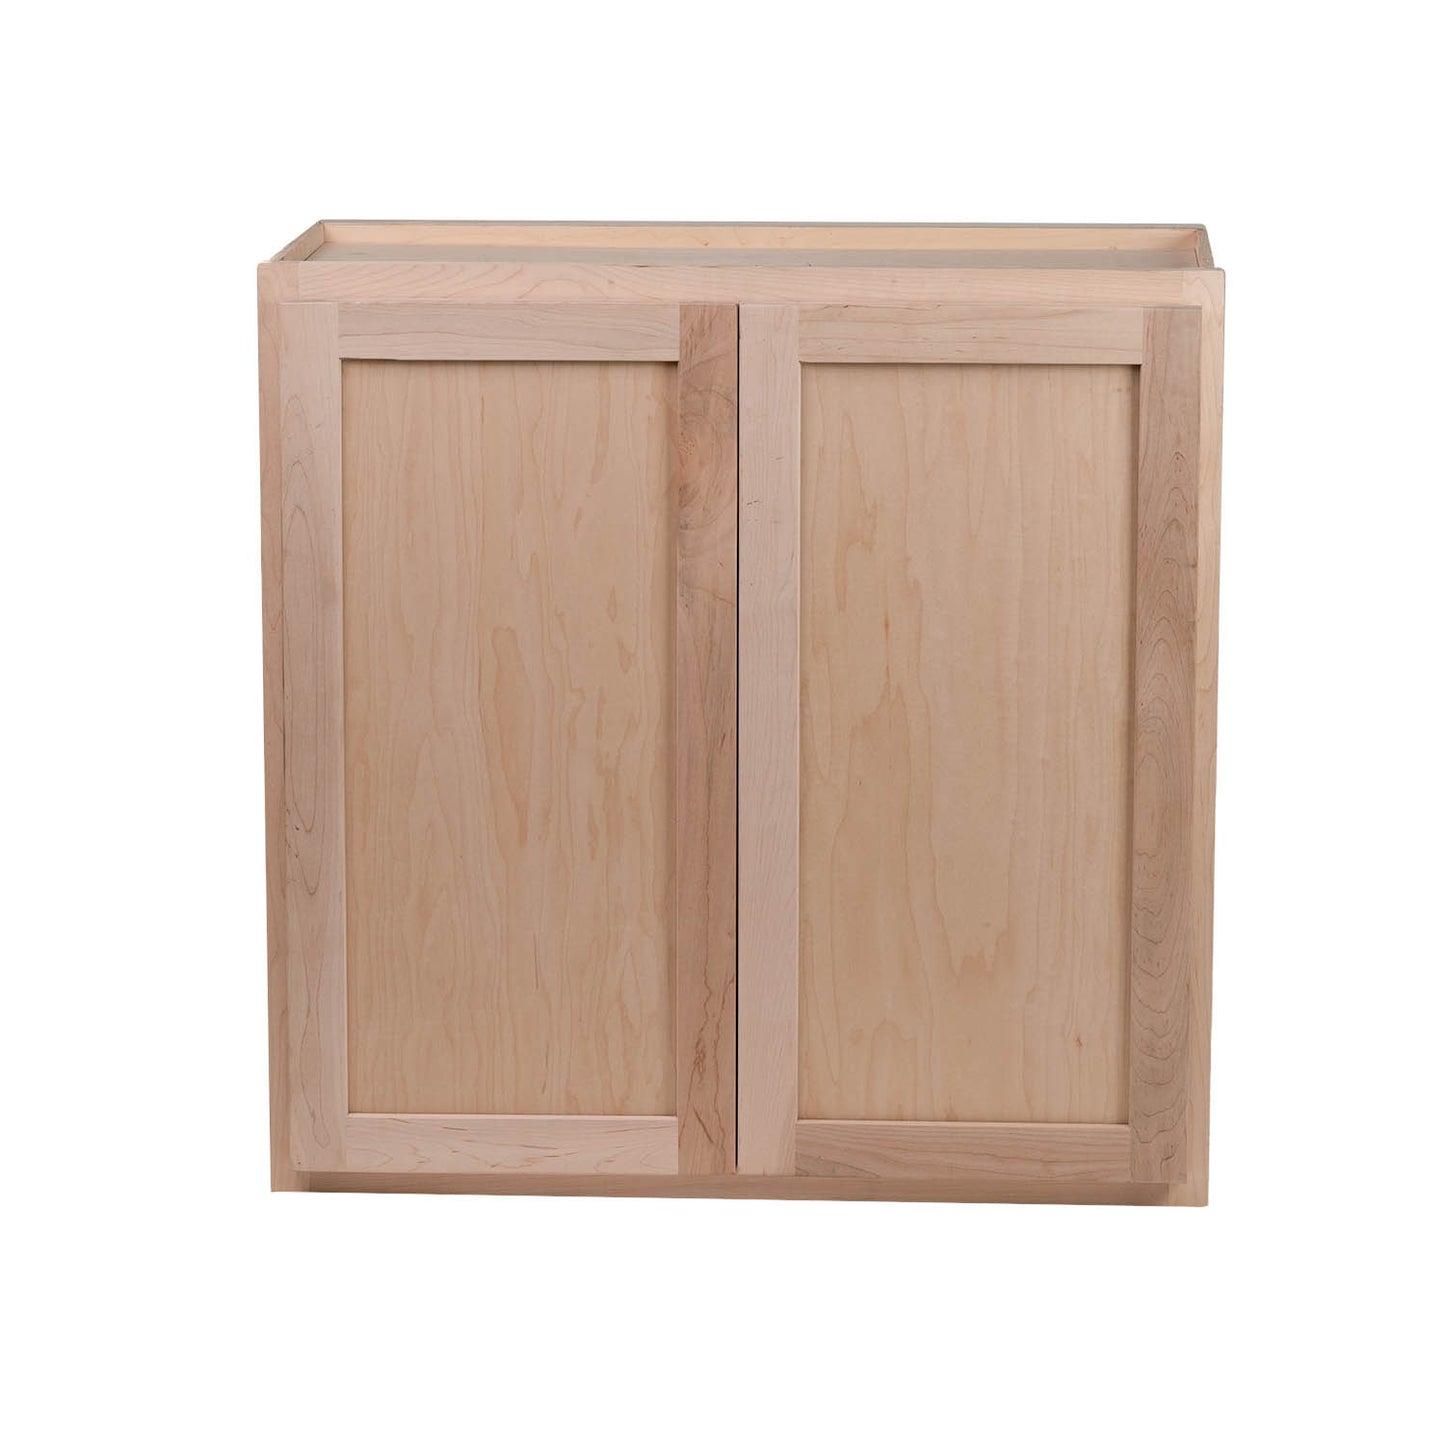 Quicklock RTA - Winding River Collection - Raw Maple 36"Wx30"Hx12"D Wall Cabinet